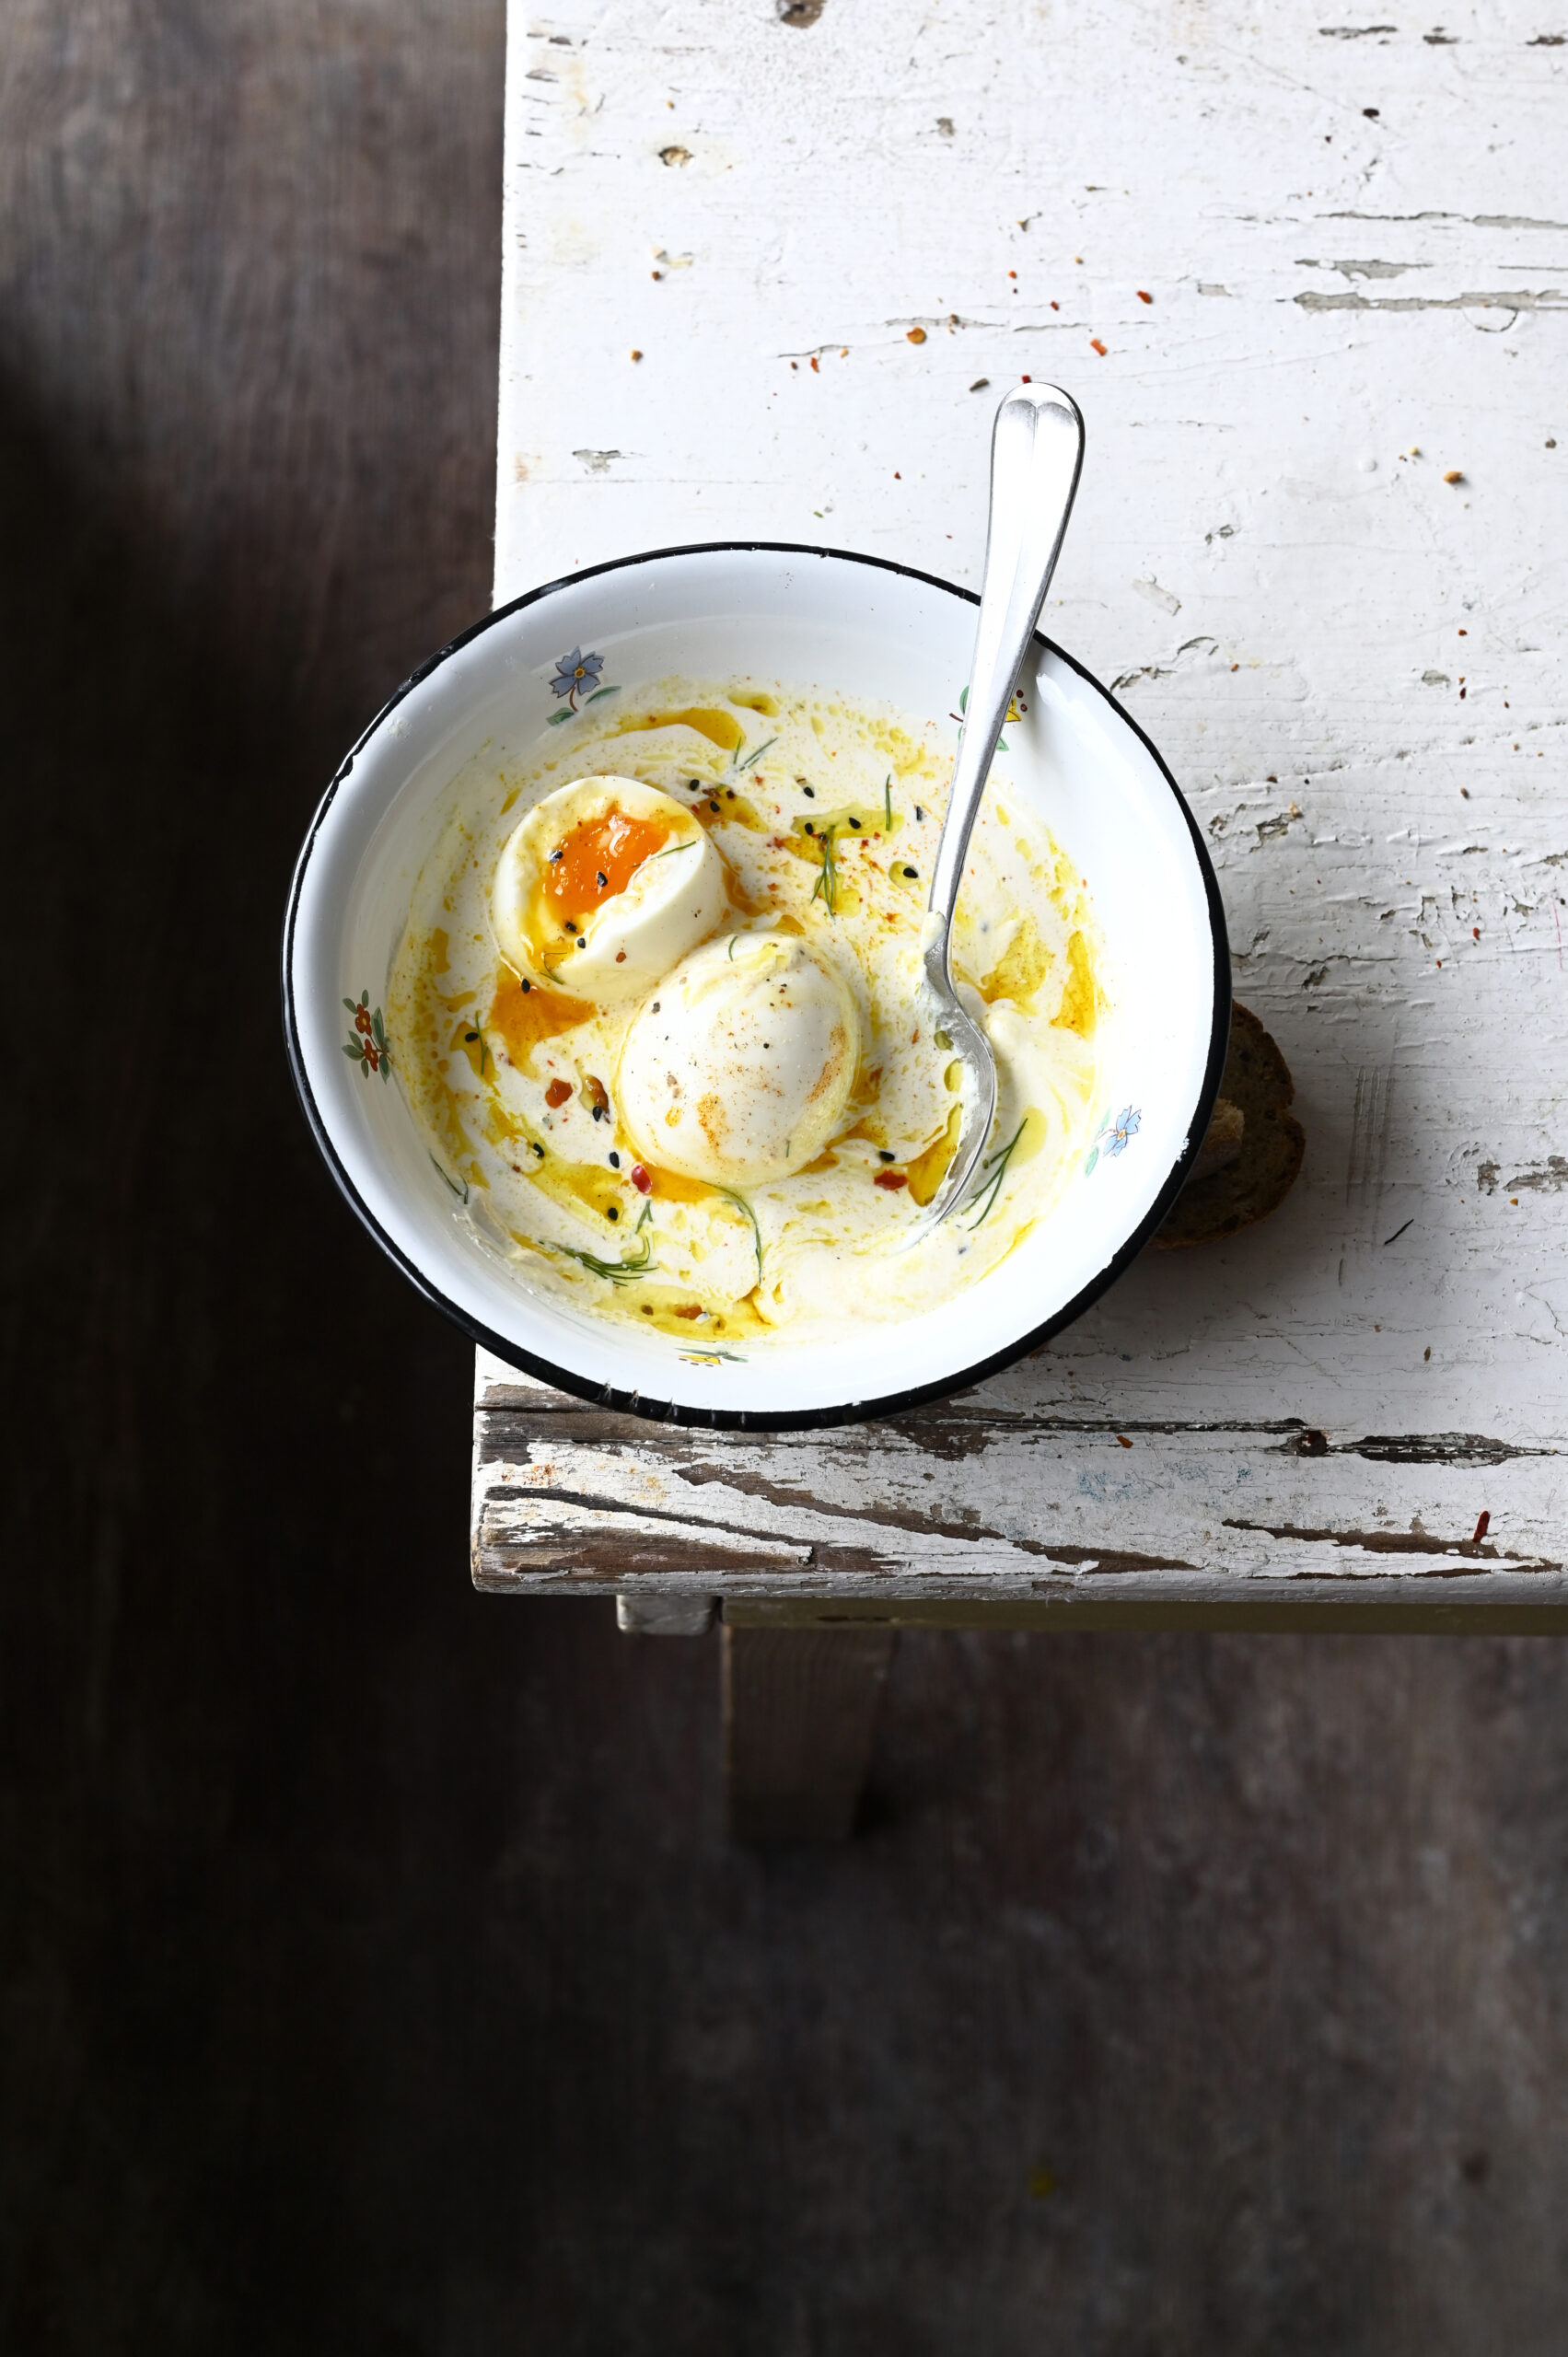 serving dumplings | Turkish style eggs with whipped ricotta and browned butter